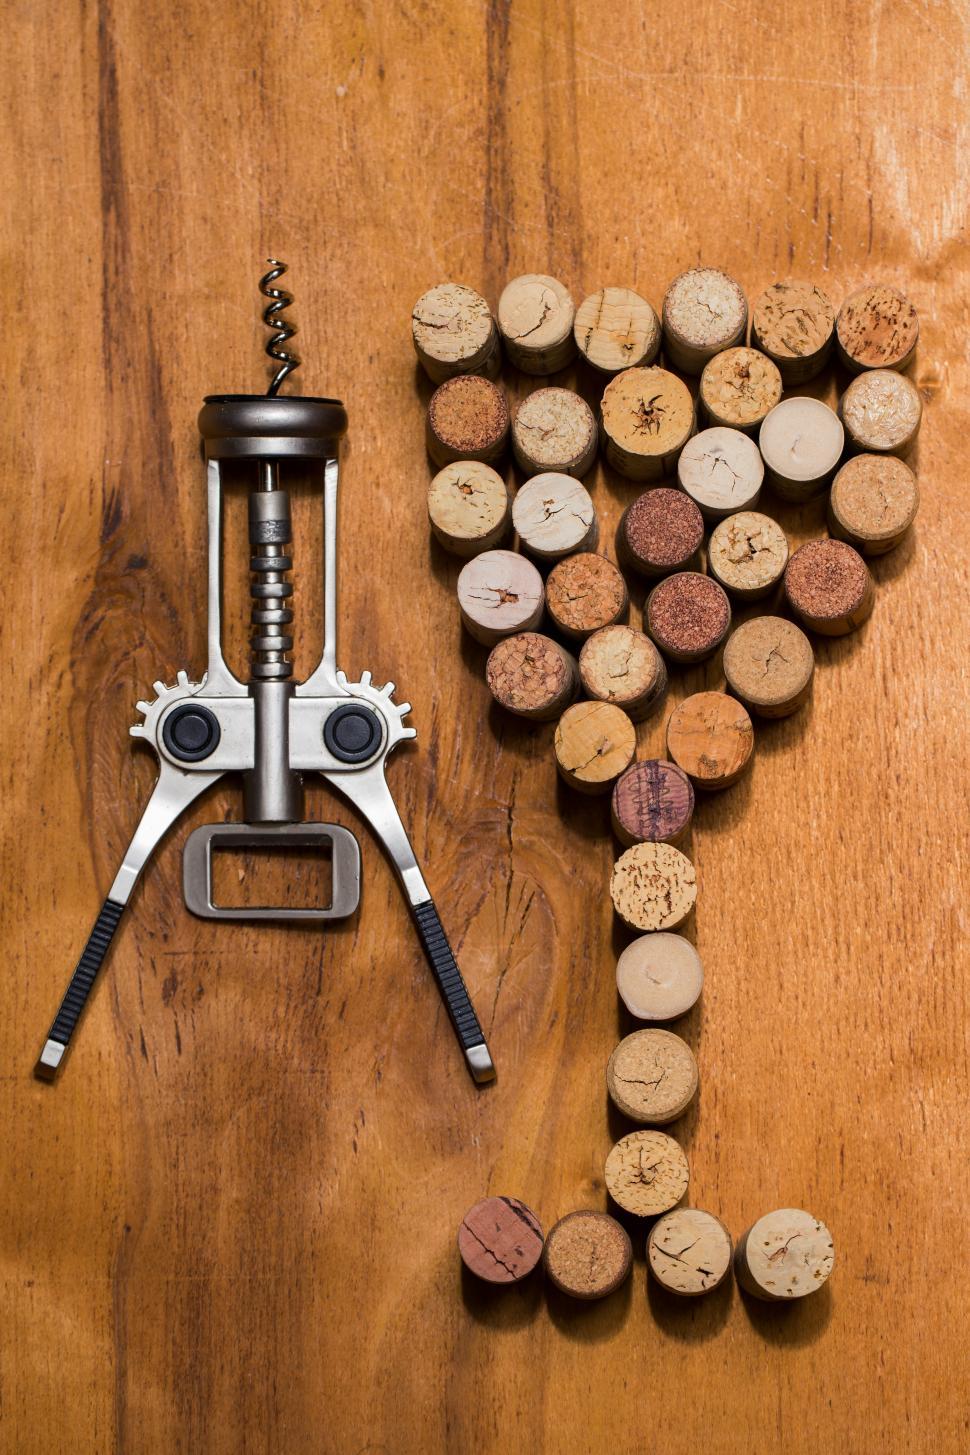 Free Image of Wine corks on the table 